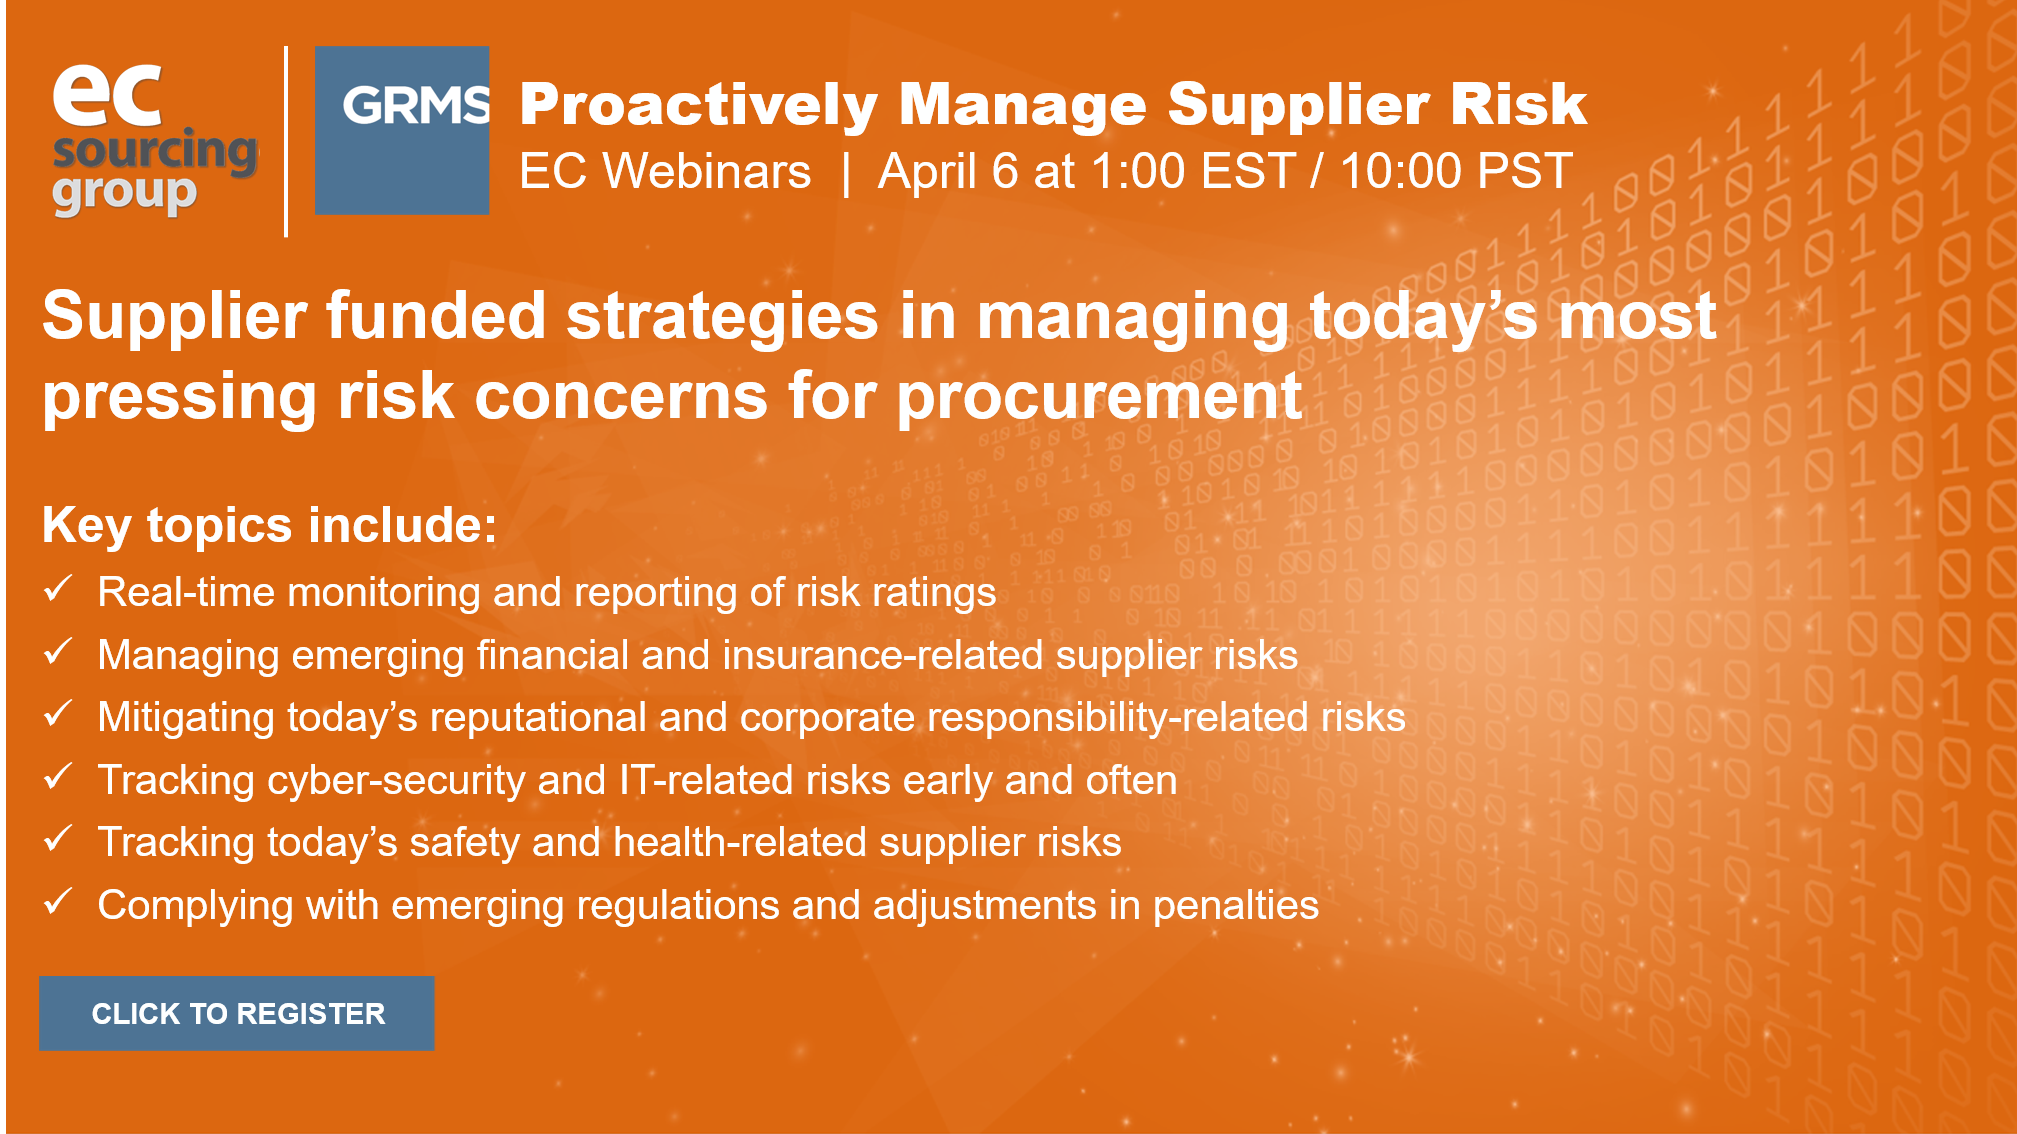 Proactively manage supplier risk